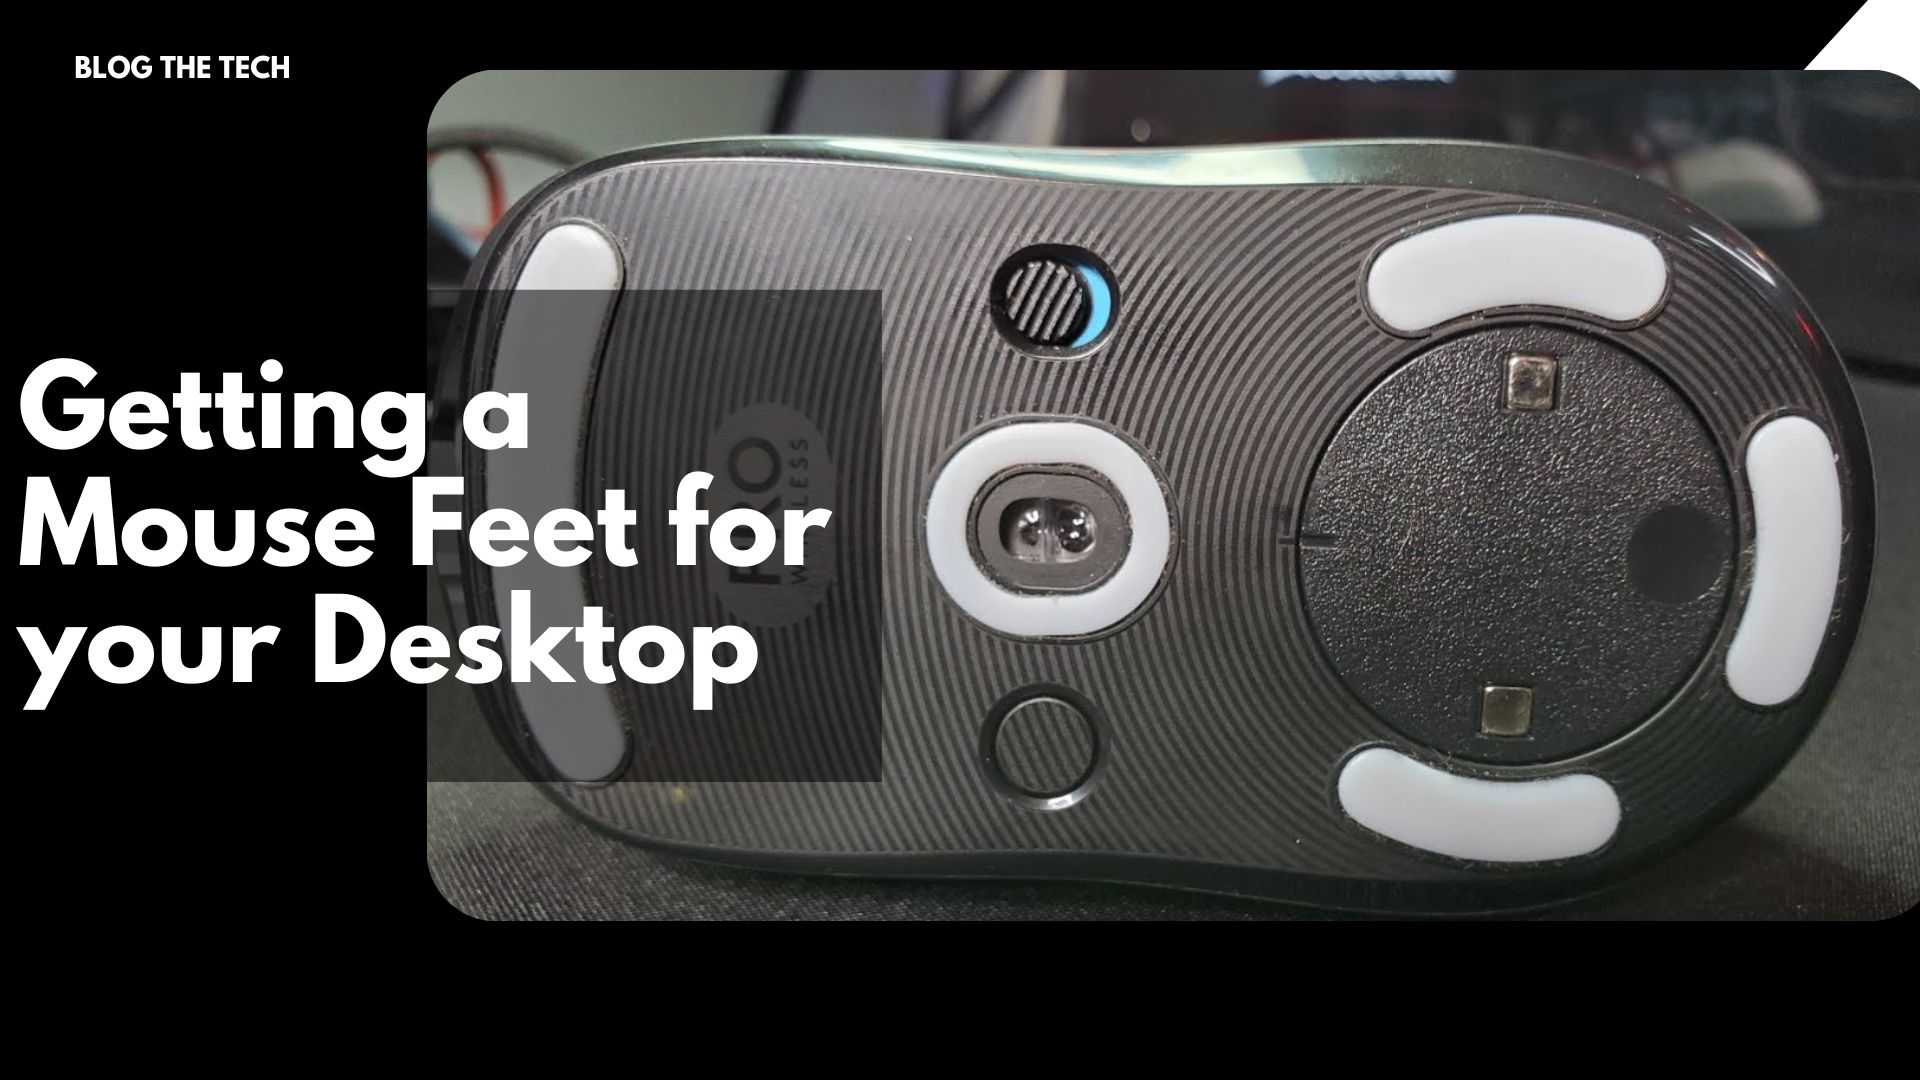 Getting a Mouse Feet for your Desktop